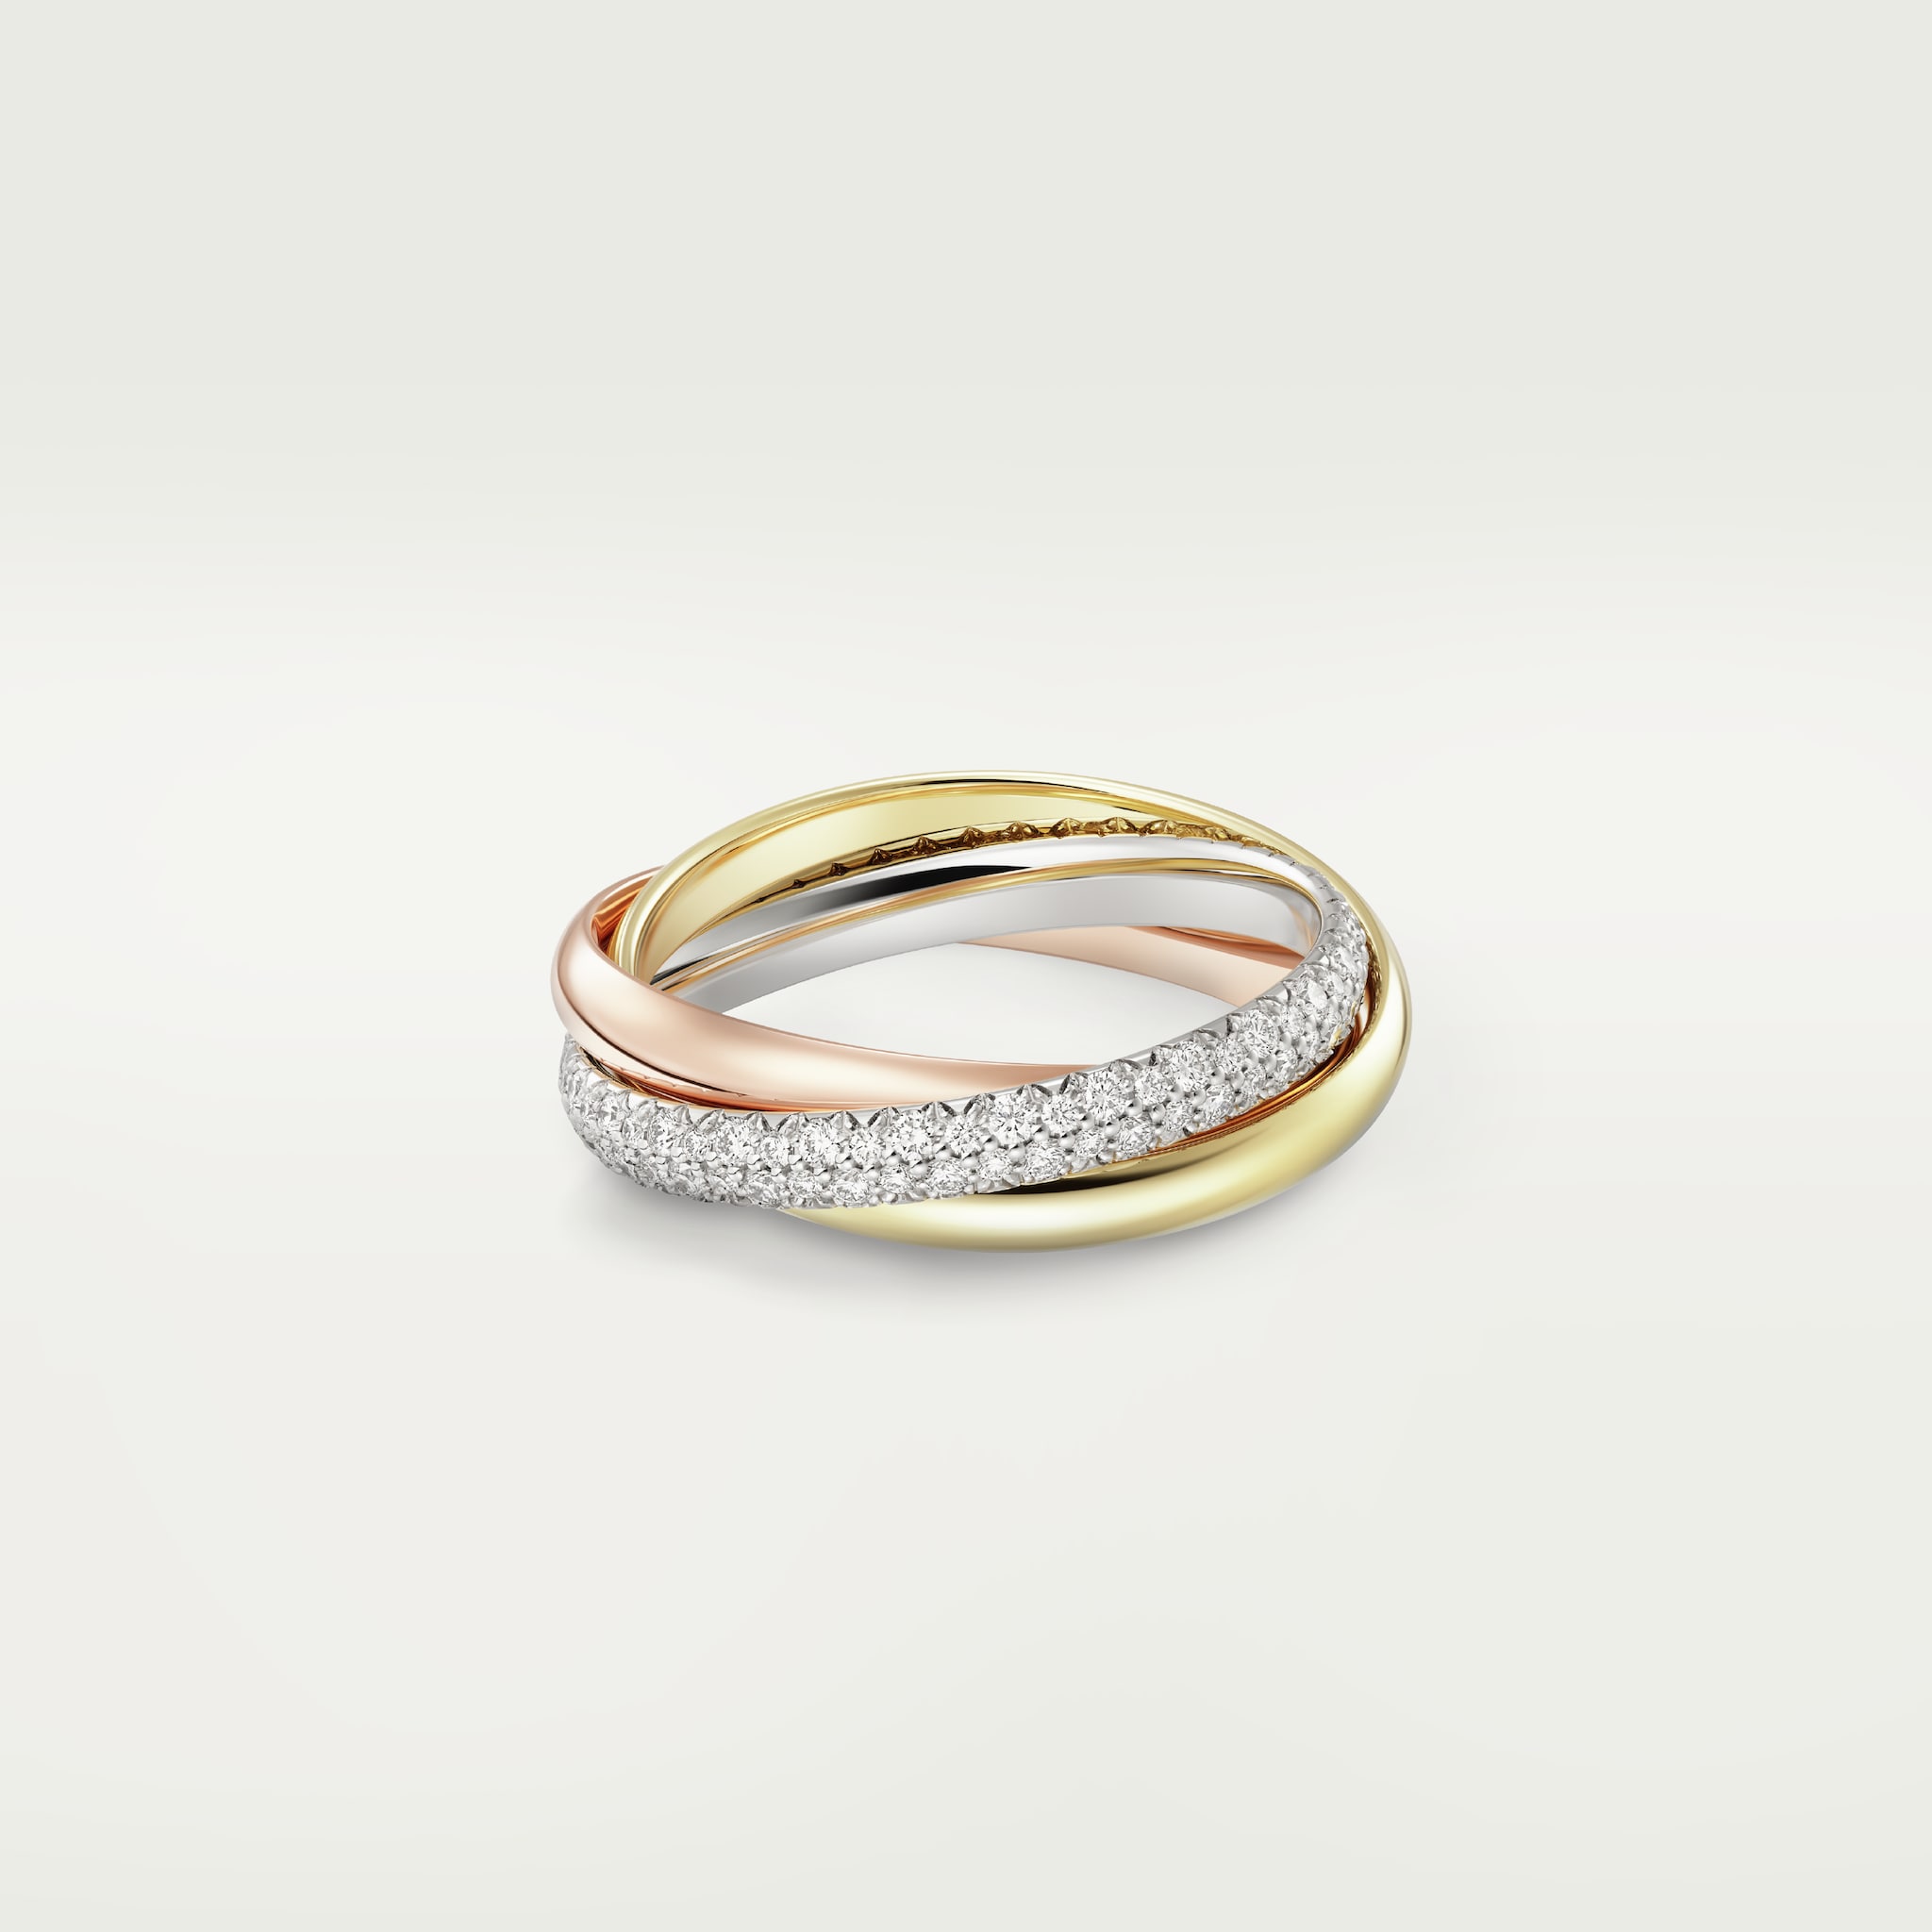 Trinity ring, small modelWhite gold, yellow gold, rose gold, diamonds